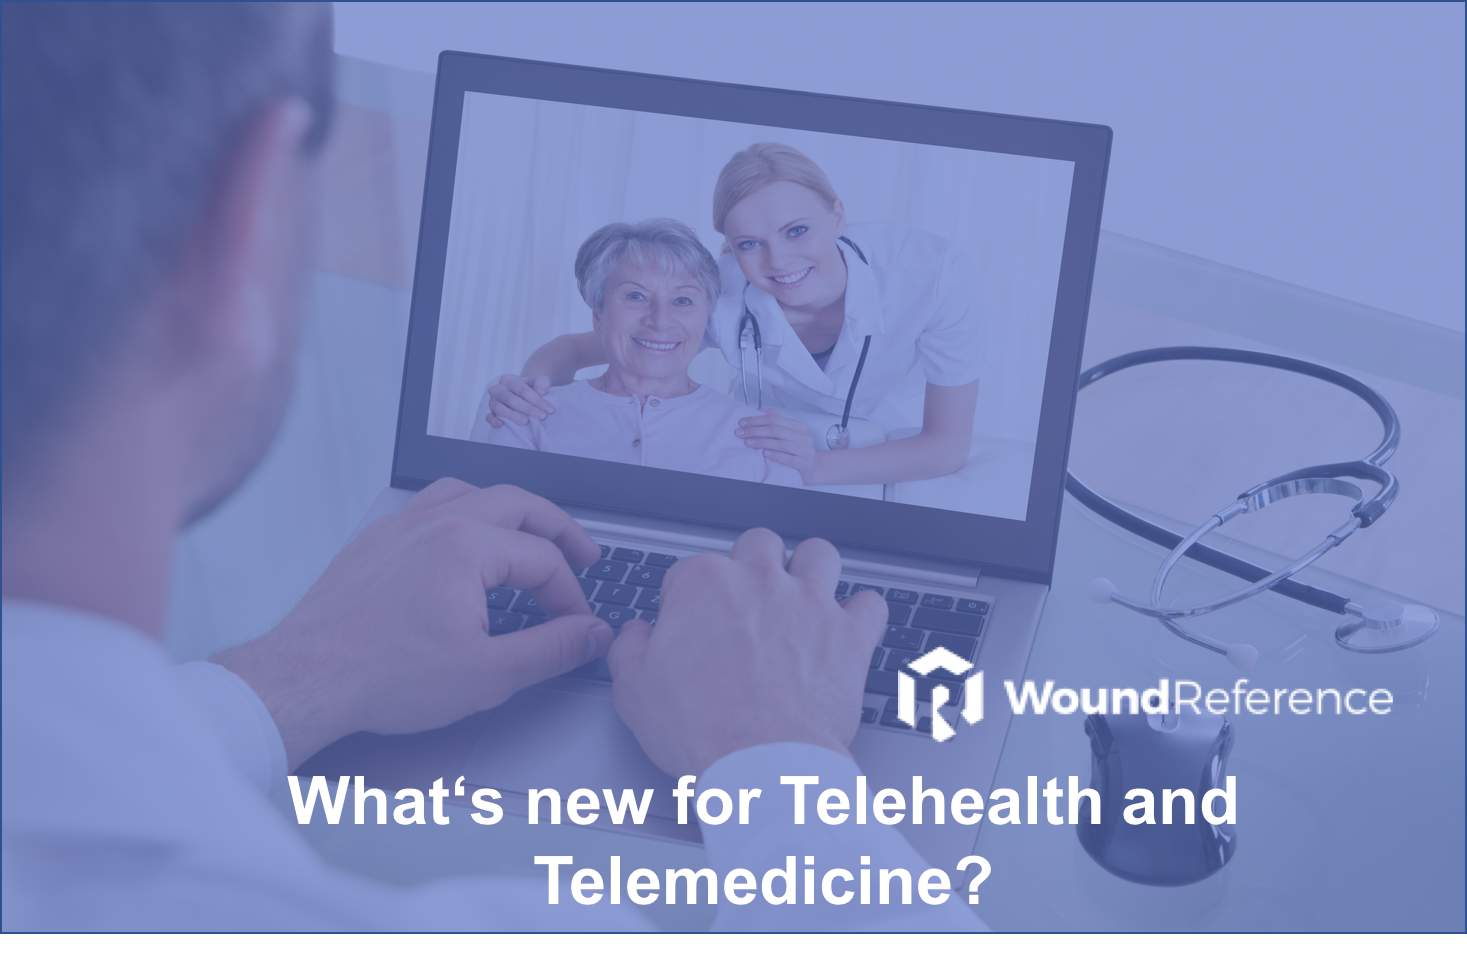 on-demand health care cheapest cheapest telemedicine affordable prices